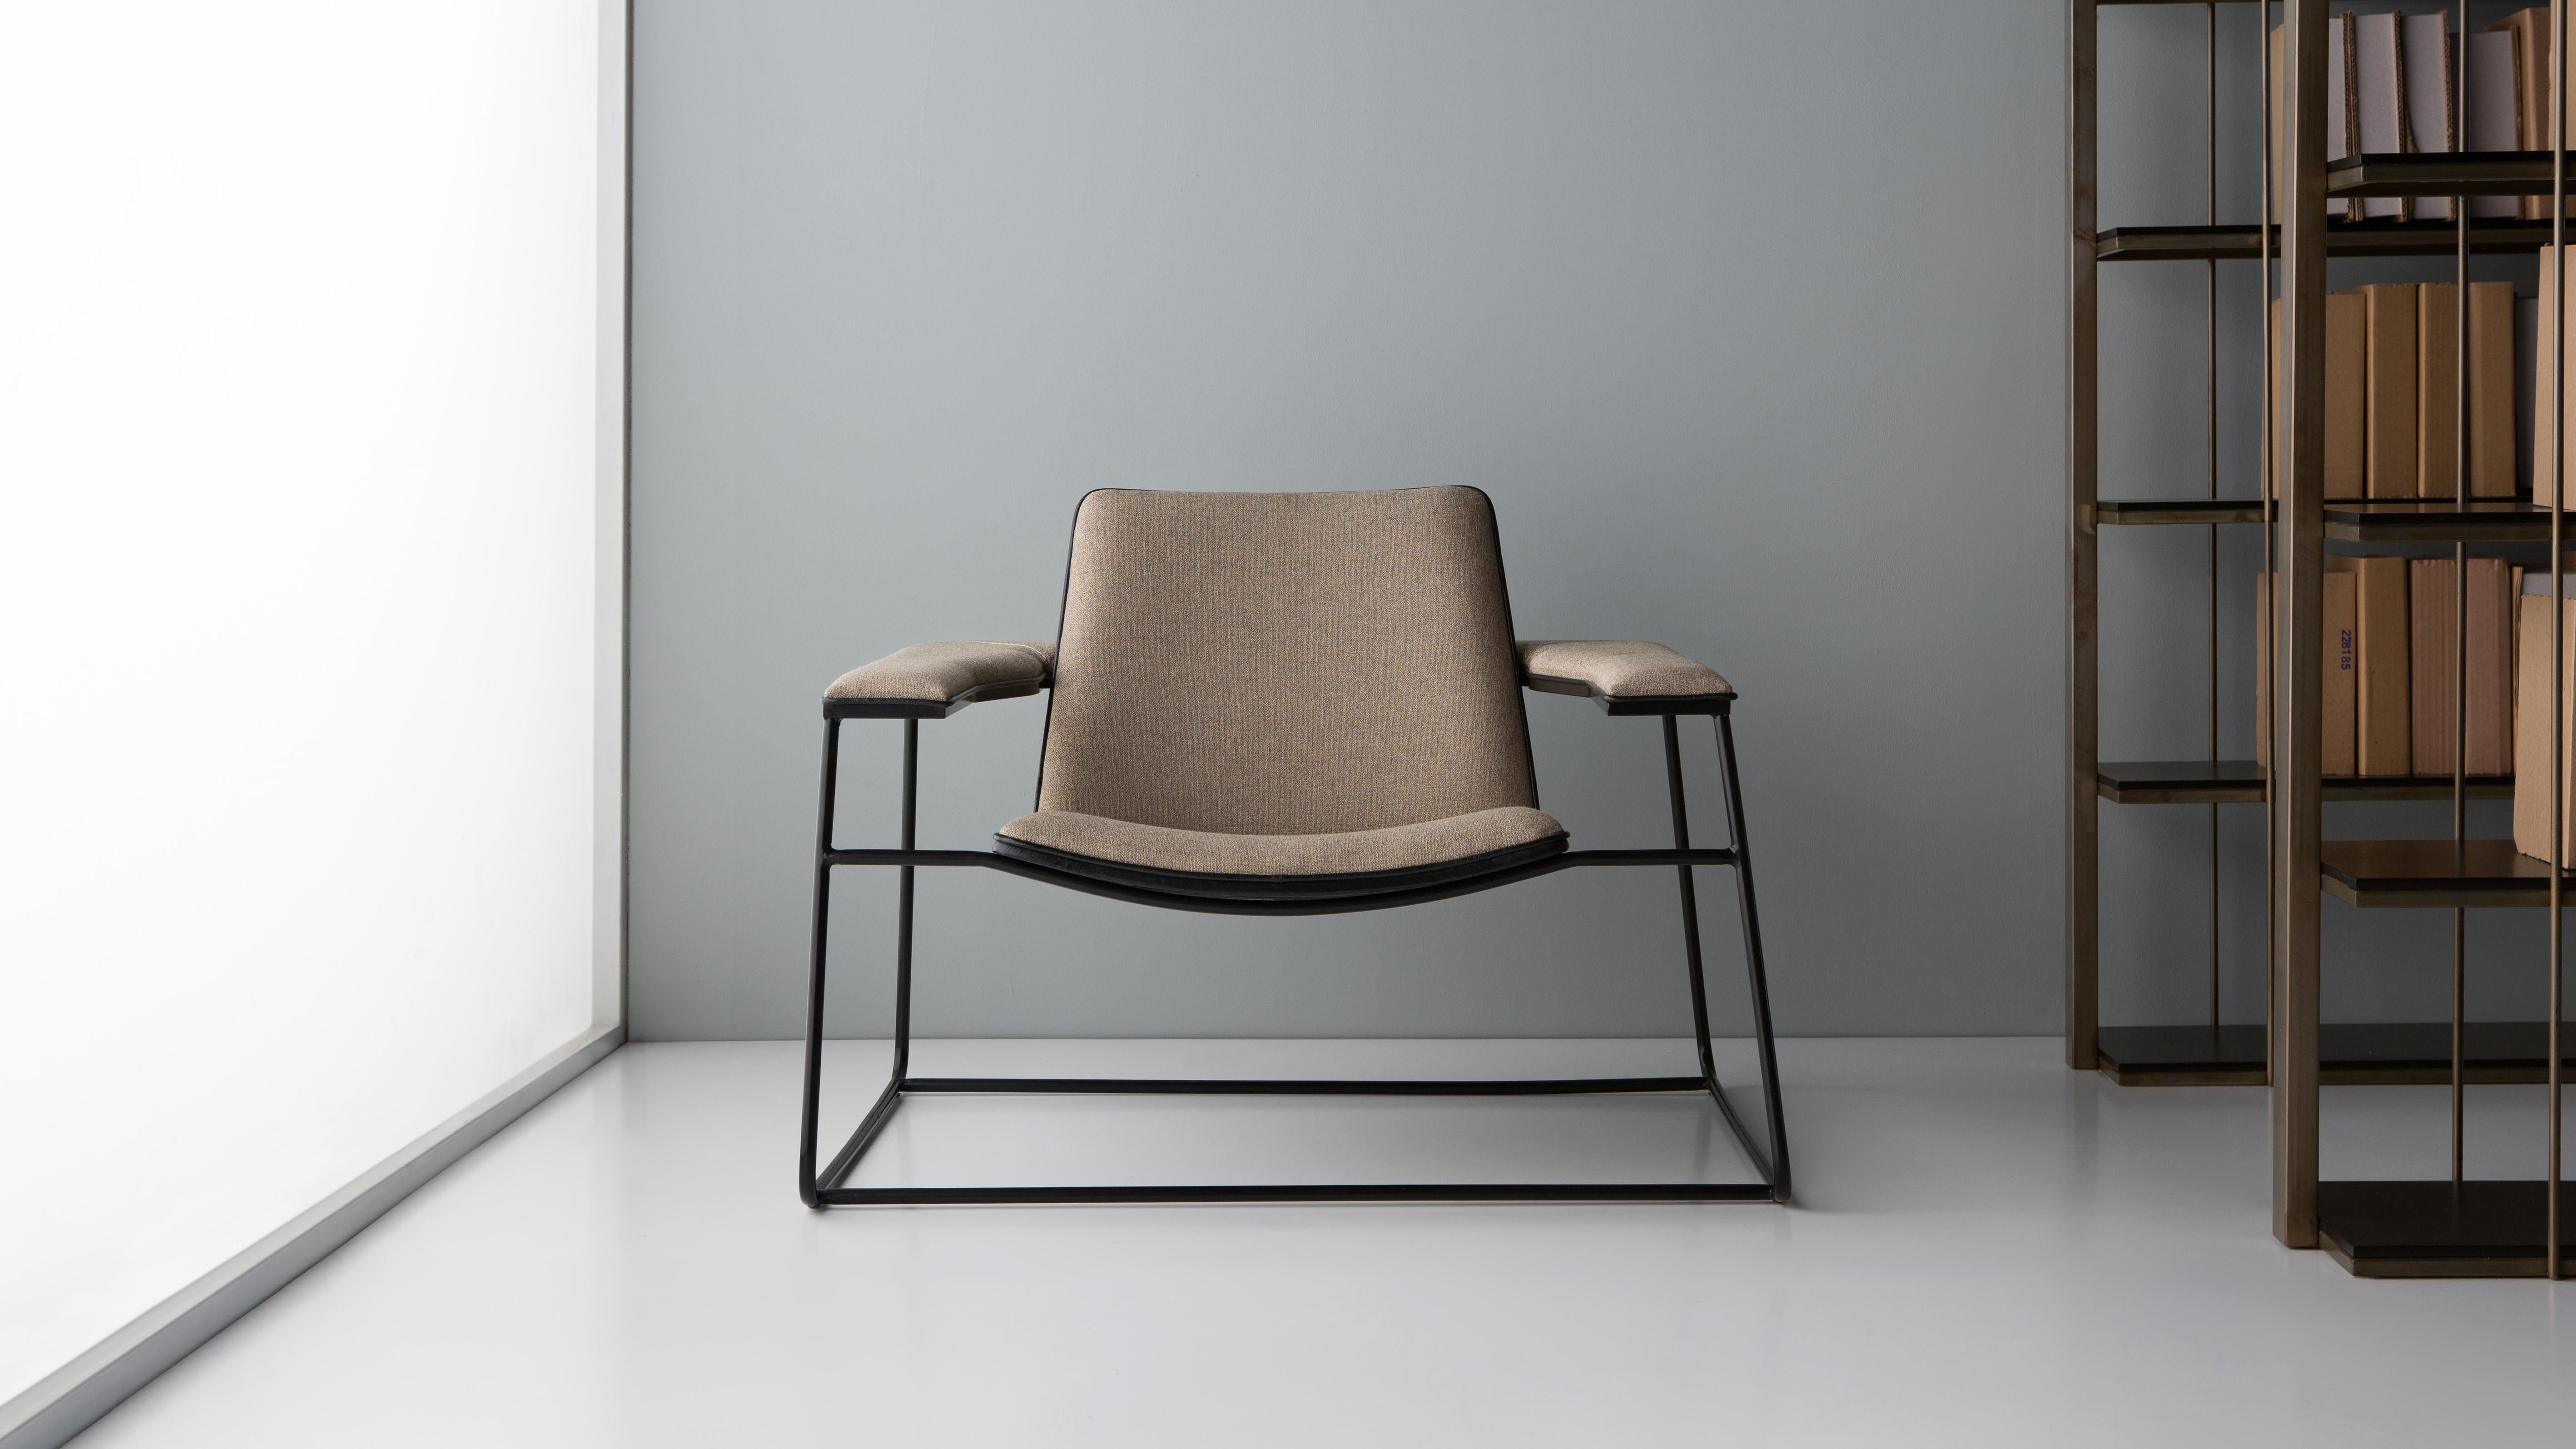 Diva with Arms Lounge Chair by Doimo Brasil
Dimensions: W 98 x D 79 x H 72 cm 
Materials: Metal, Fabric, Leather.


With the intention of providing good taste and personality, Doimo deciphers trends and follows the evolution of man and his space. To